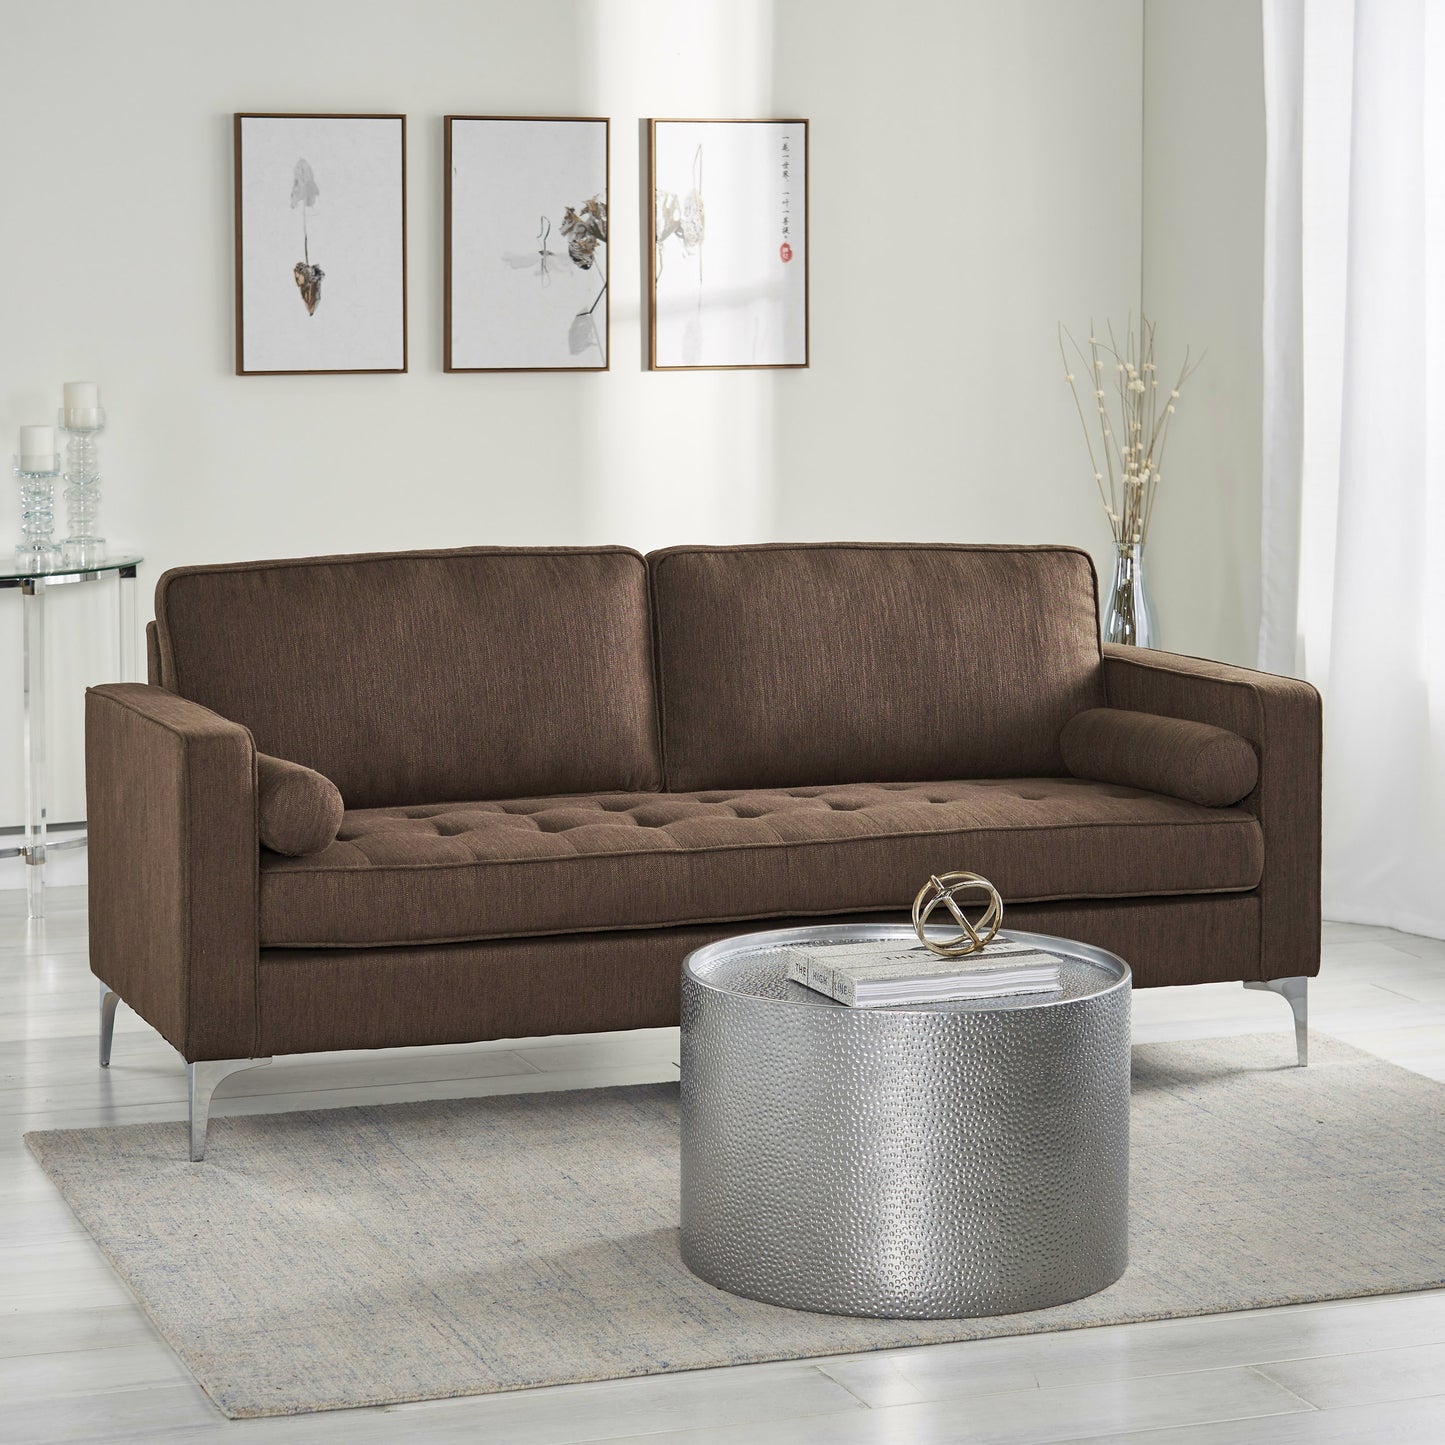 Divith Contemporary Tufted Fabric 3 Seater Sofa